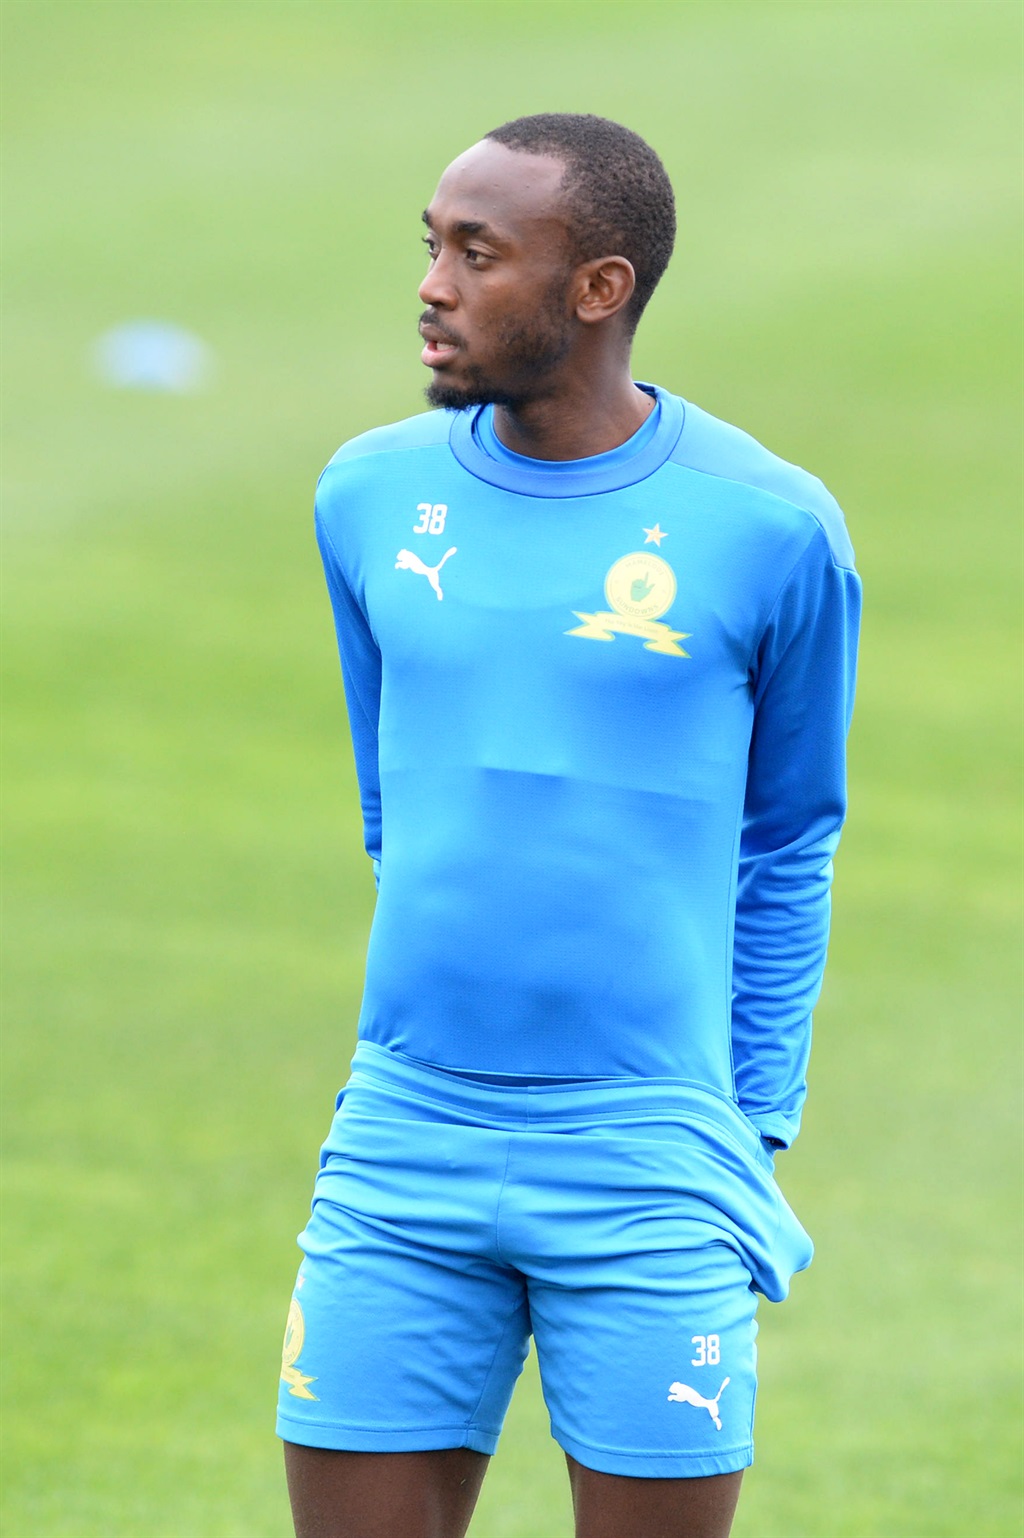 MIDRAND, SOUTH AFRICA - august 31: Peter Shalulile of Mamelodi Sundowns during the Mamelodi Sundowns media open day at Chloorkop on August 31, 2022 in Midrand, South Africa. (Photo by Lefty Shivambu/Gallo Images)